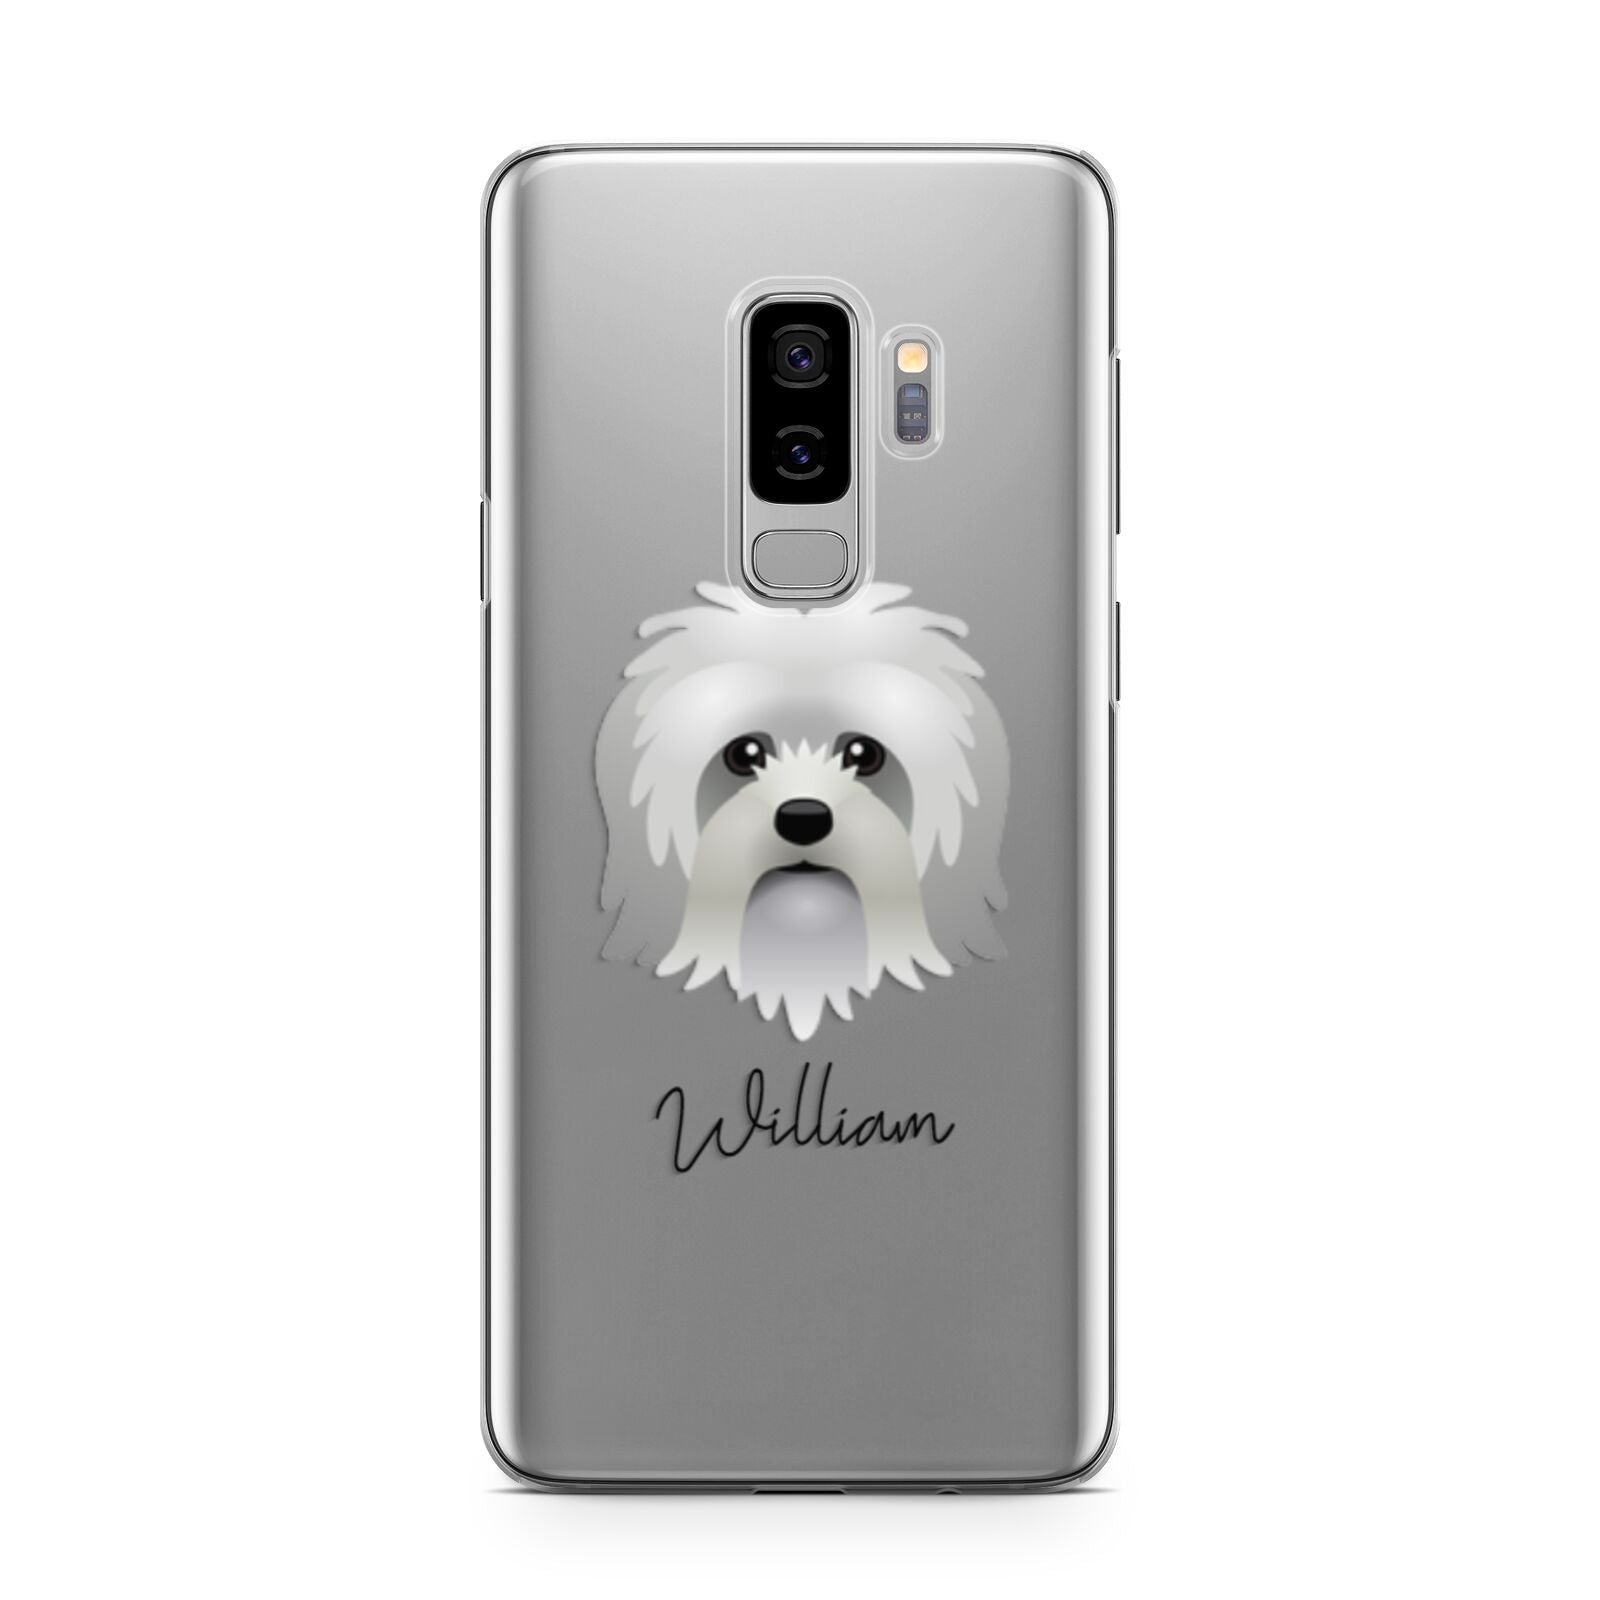 Lo wchen Personalised Samsung Galaxy S9 Plus Case on Silver phone